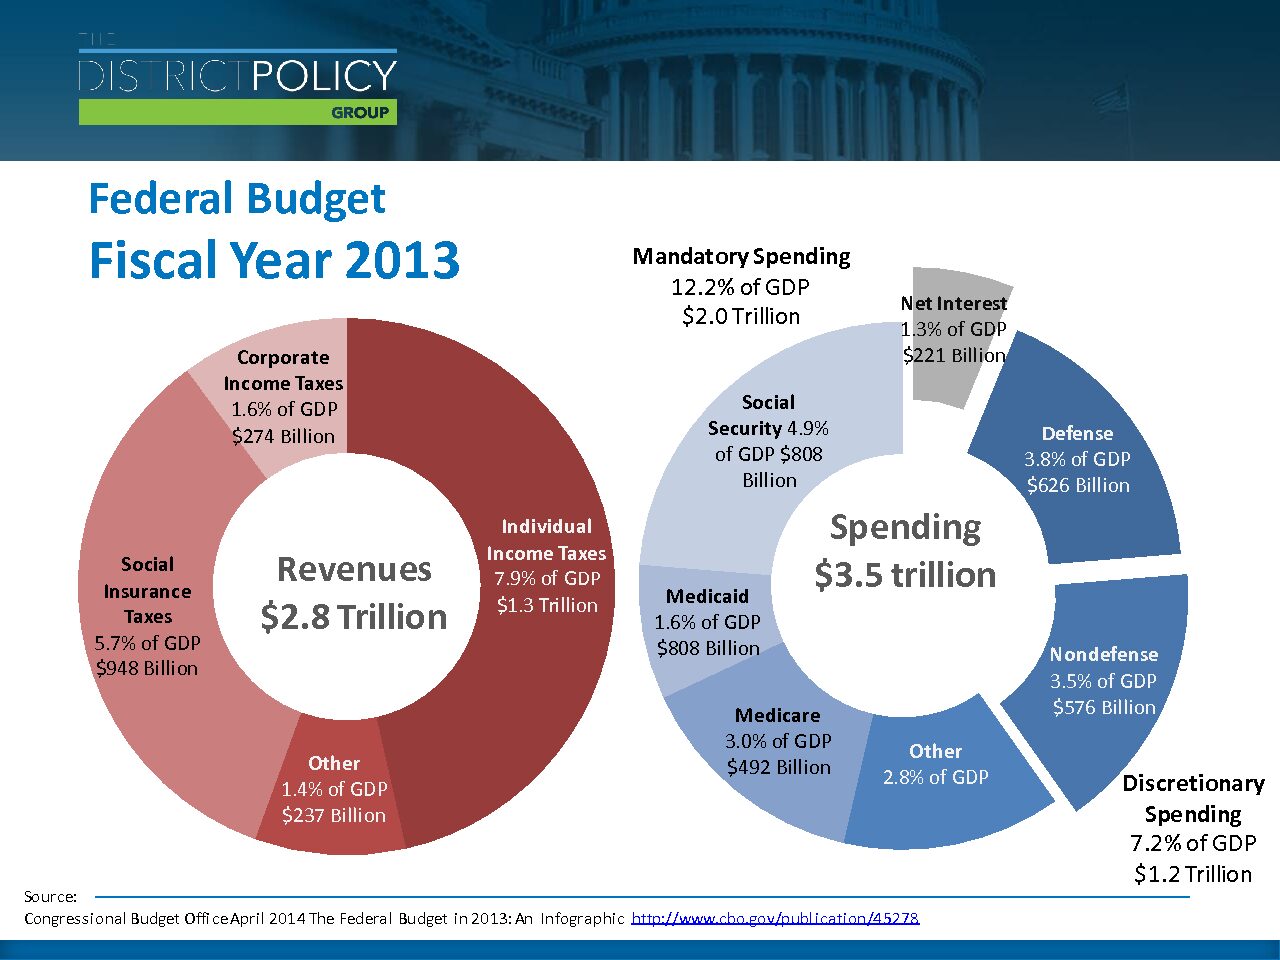 Federal Budget, Fiscal Year 2013